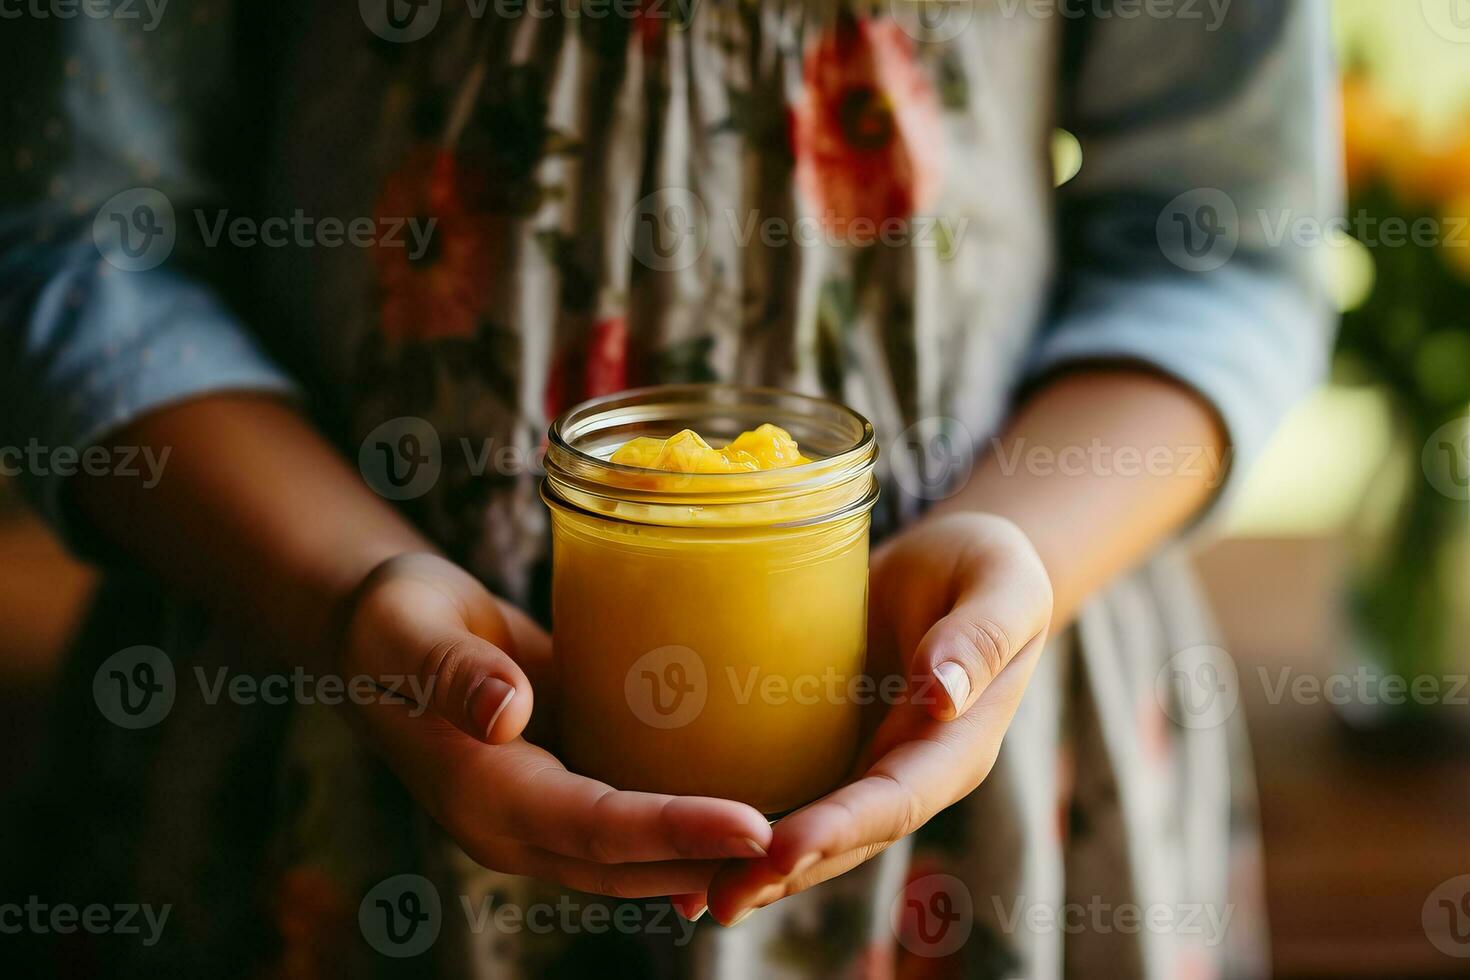 A close-up photo of a mothers hand gently holding a ripe organic apple next to a jar of homemade puree